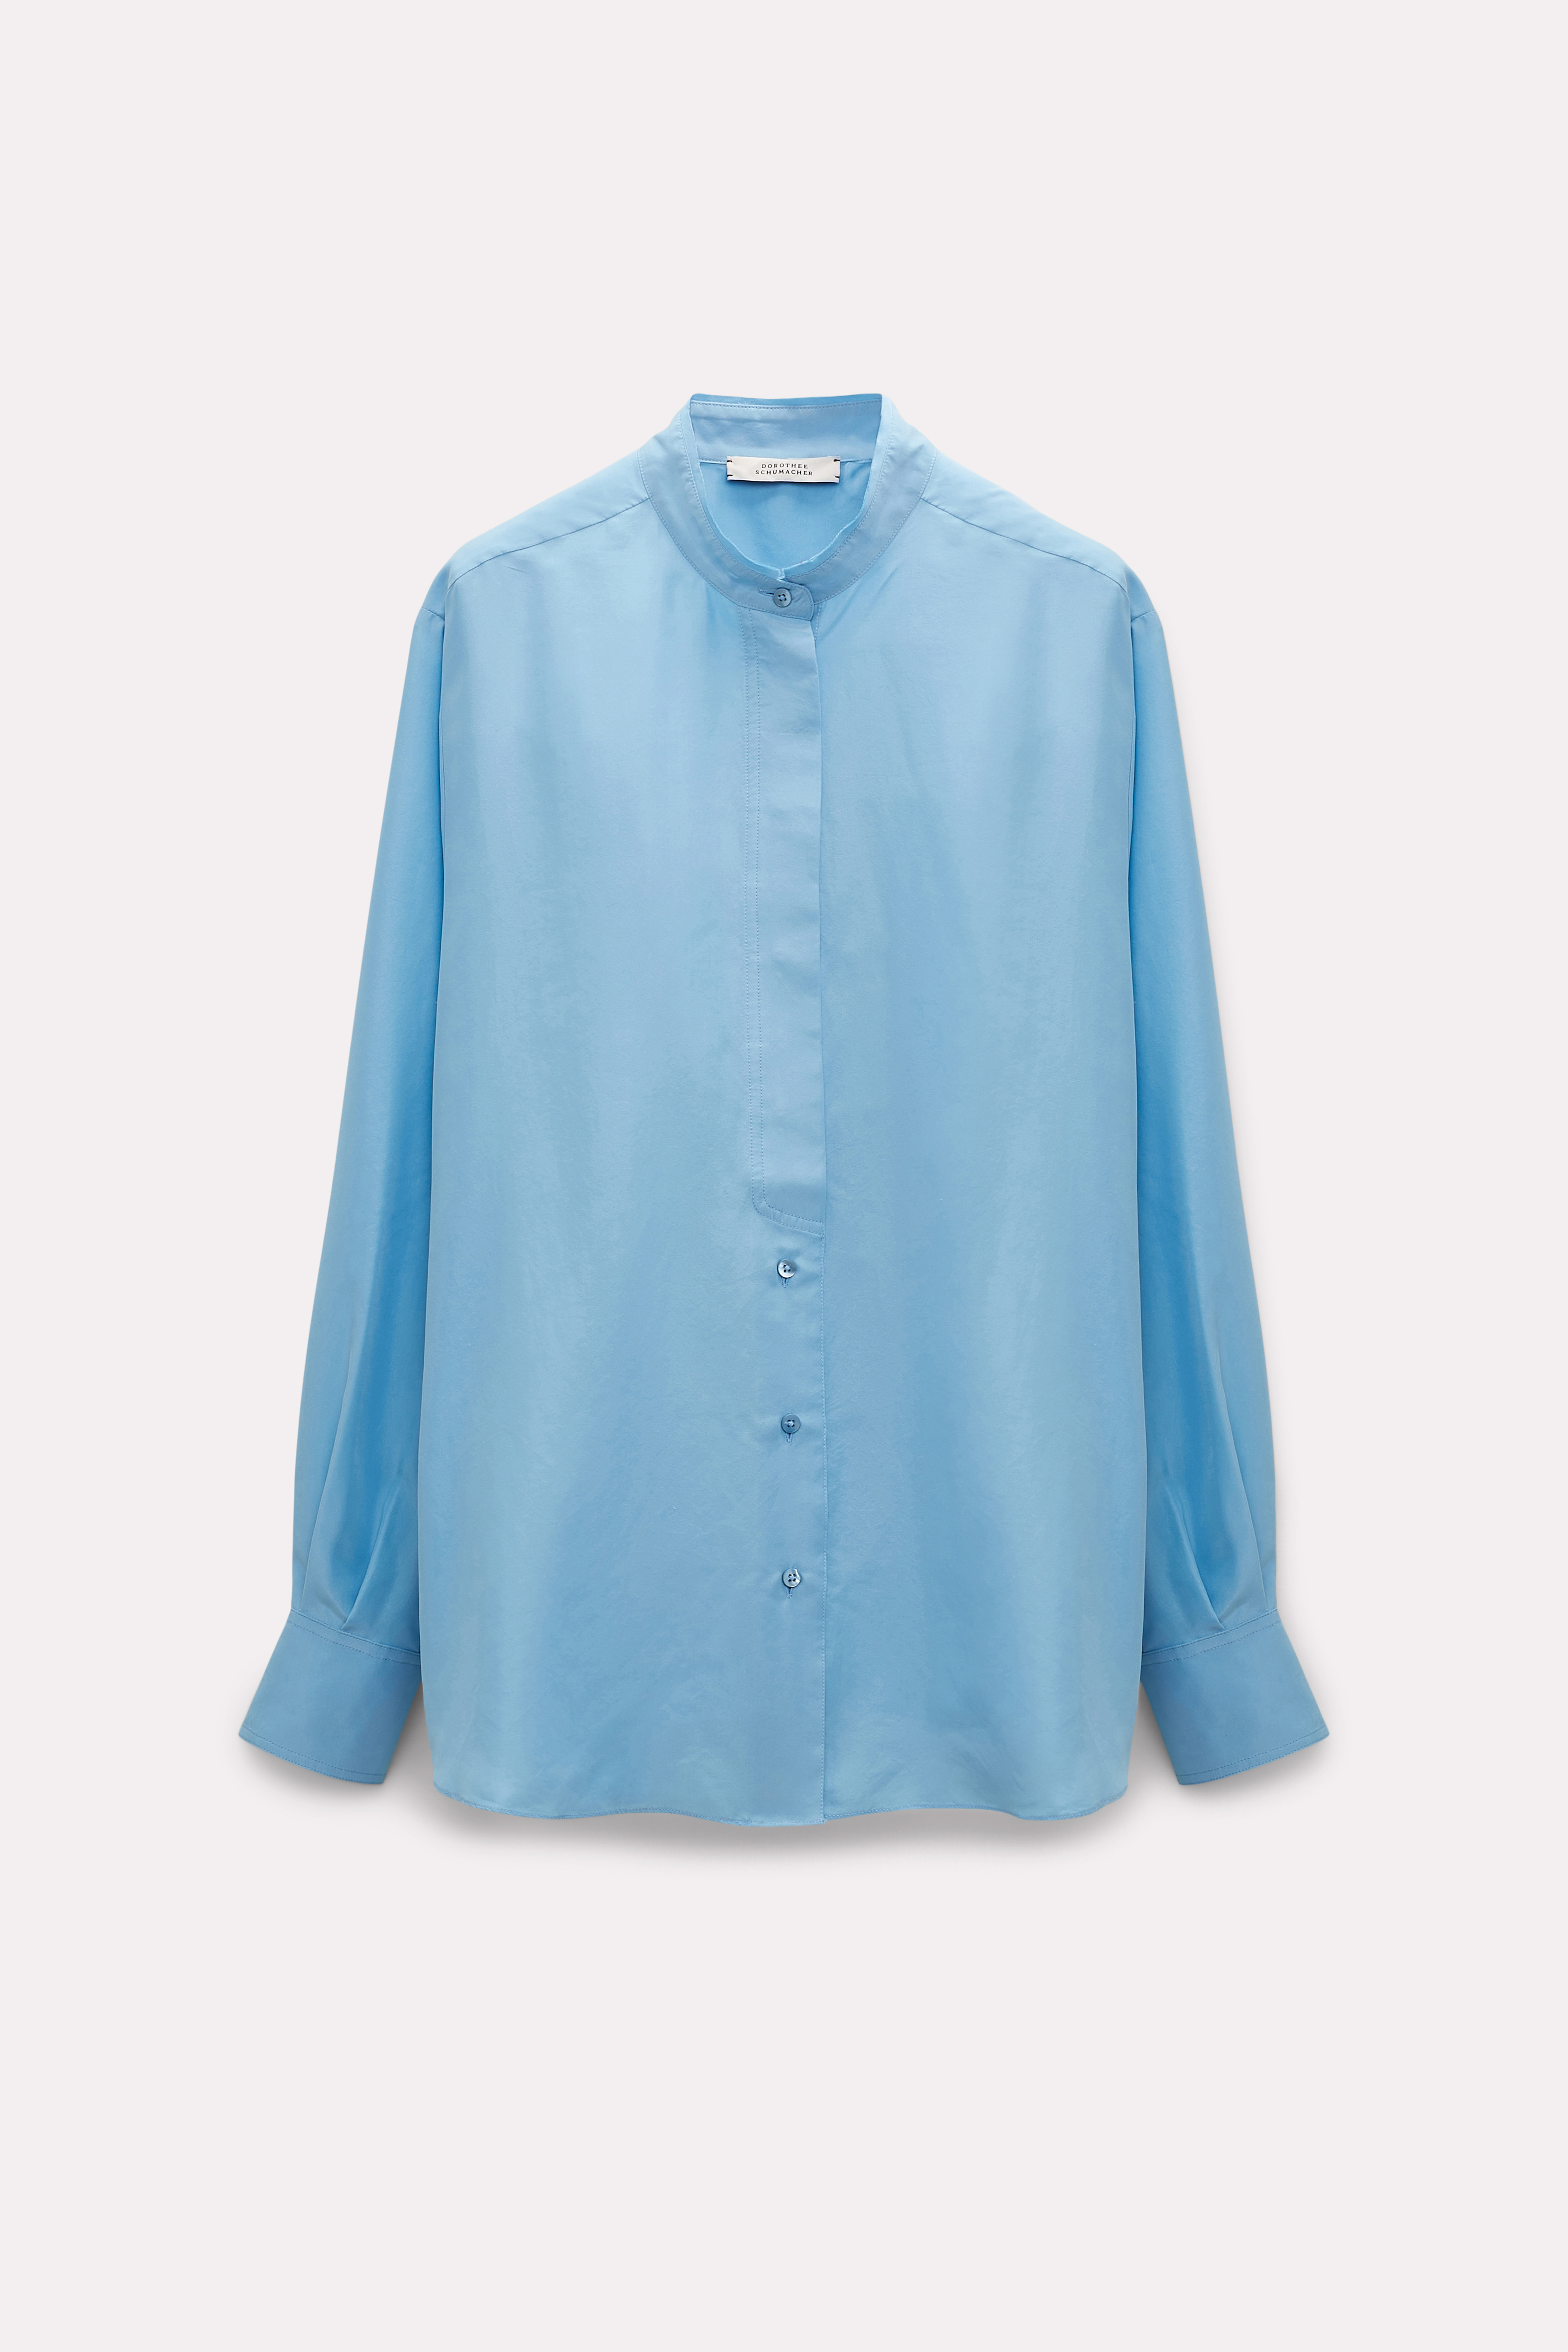 Dorothee Schumacher Washed Silk Shirt With Stand Collar In Blue